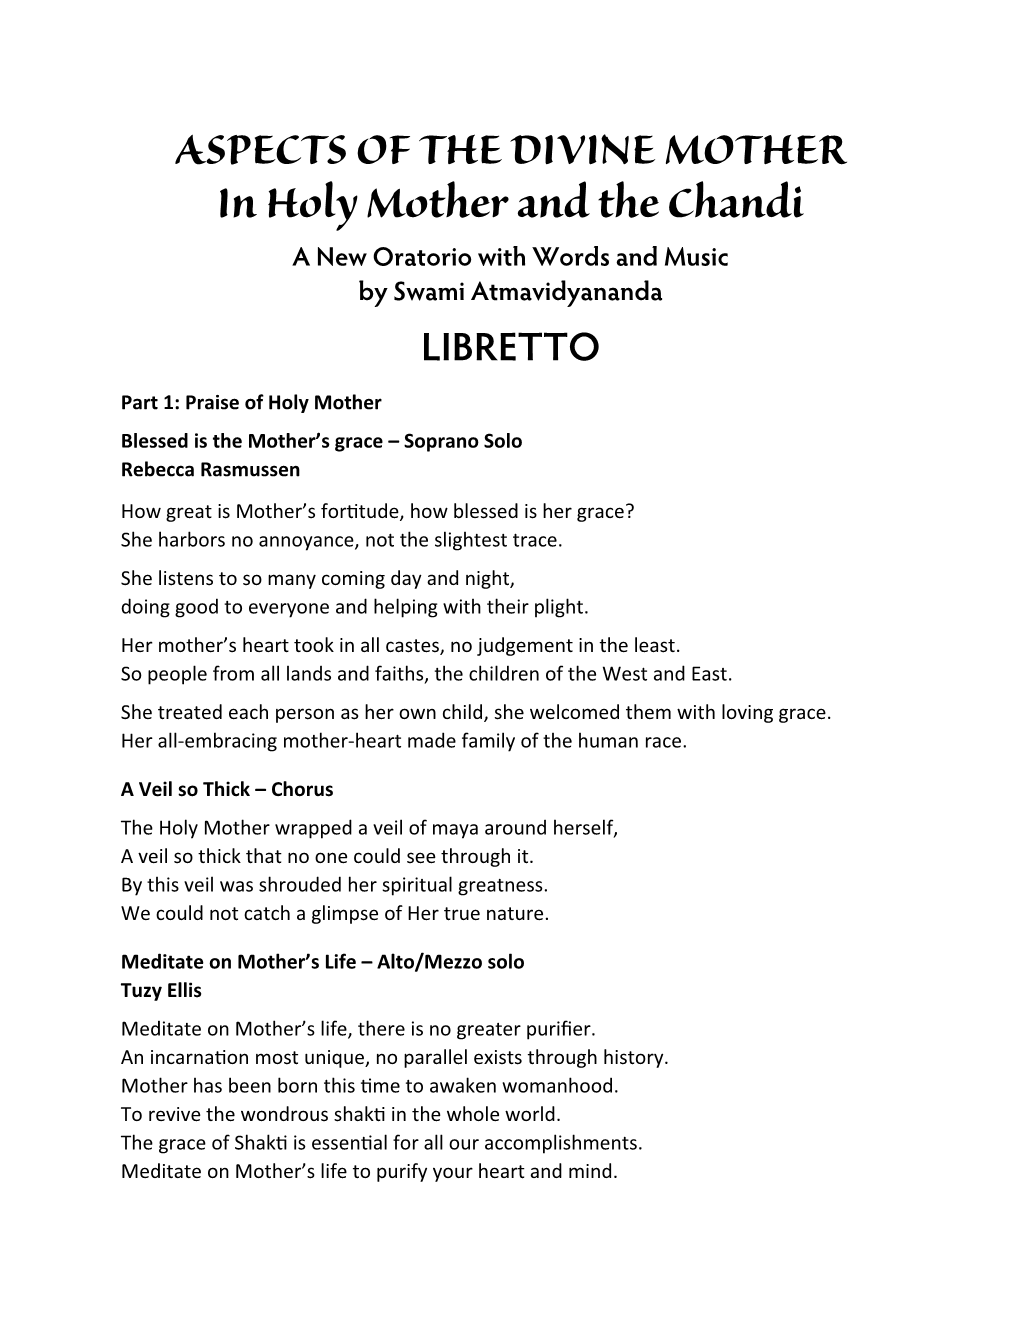 ASPECTS of the DIVINE MOTHER in Holy Mother and the Chandi a New Oratorio with Words and Music by Swami Atmavidyananda LIBRETTO